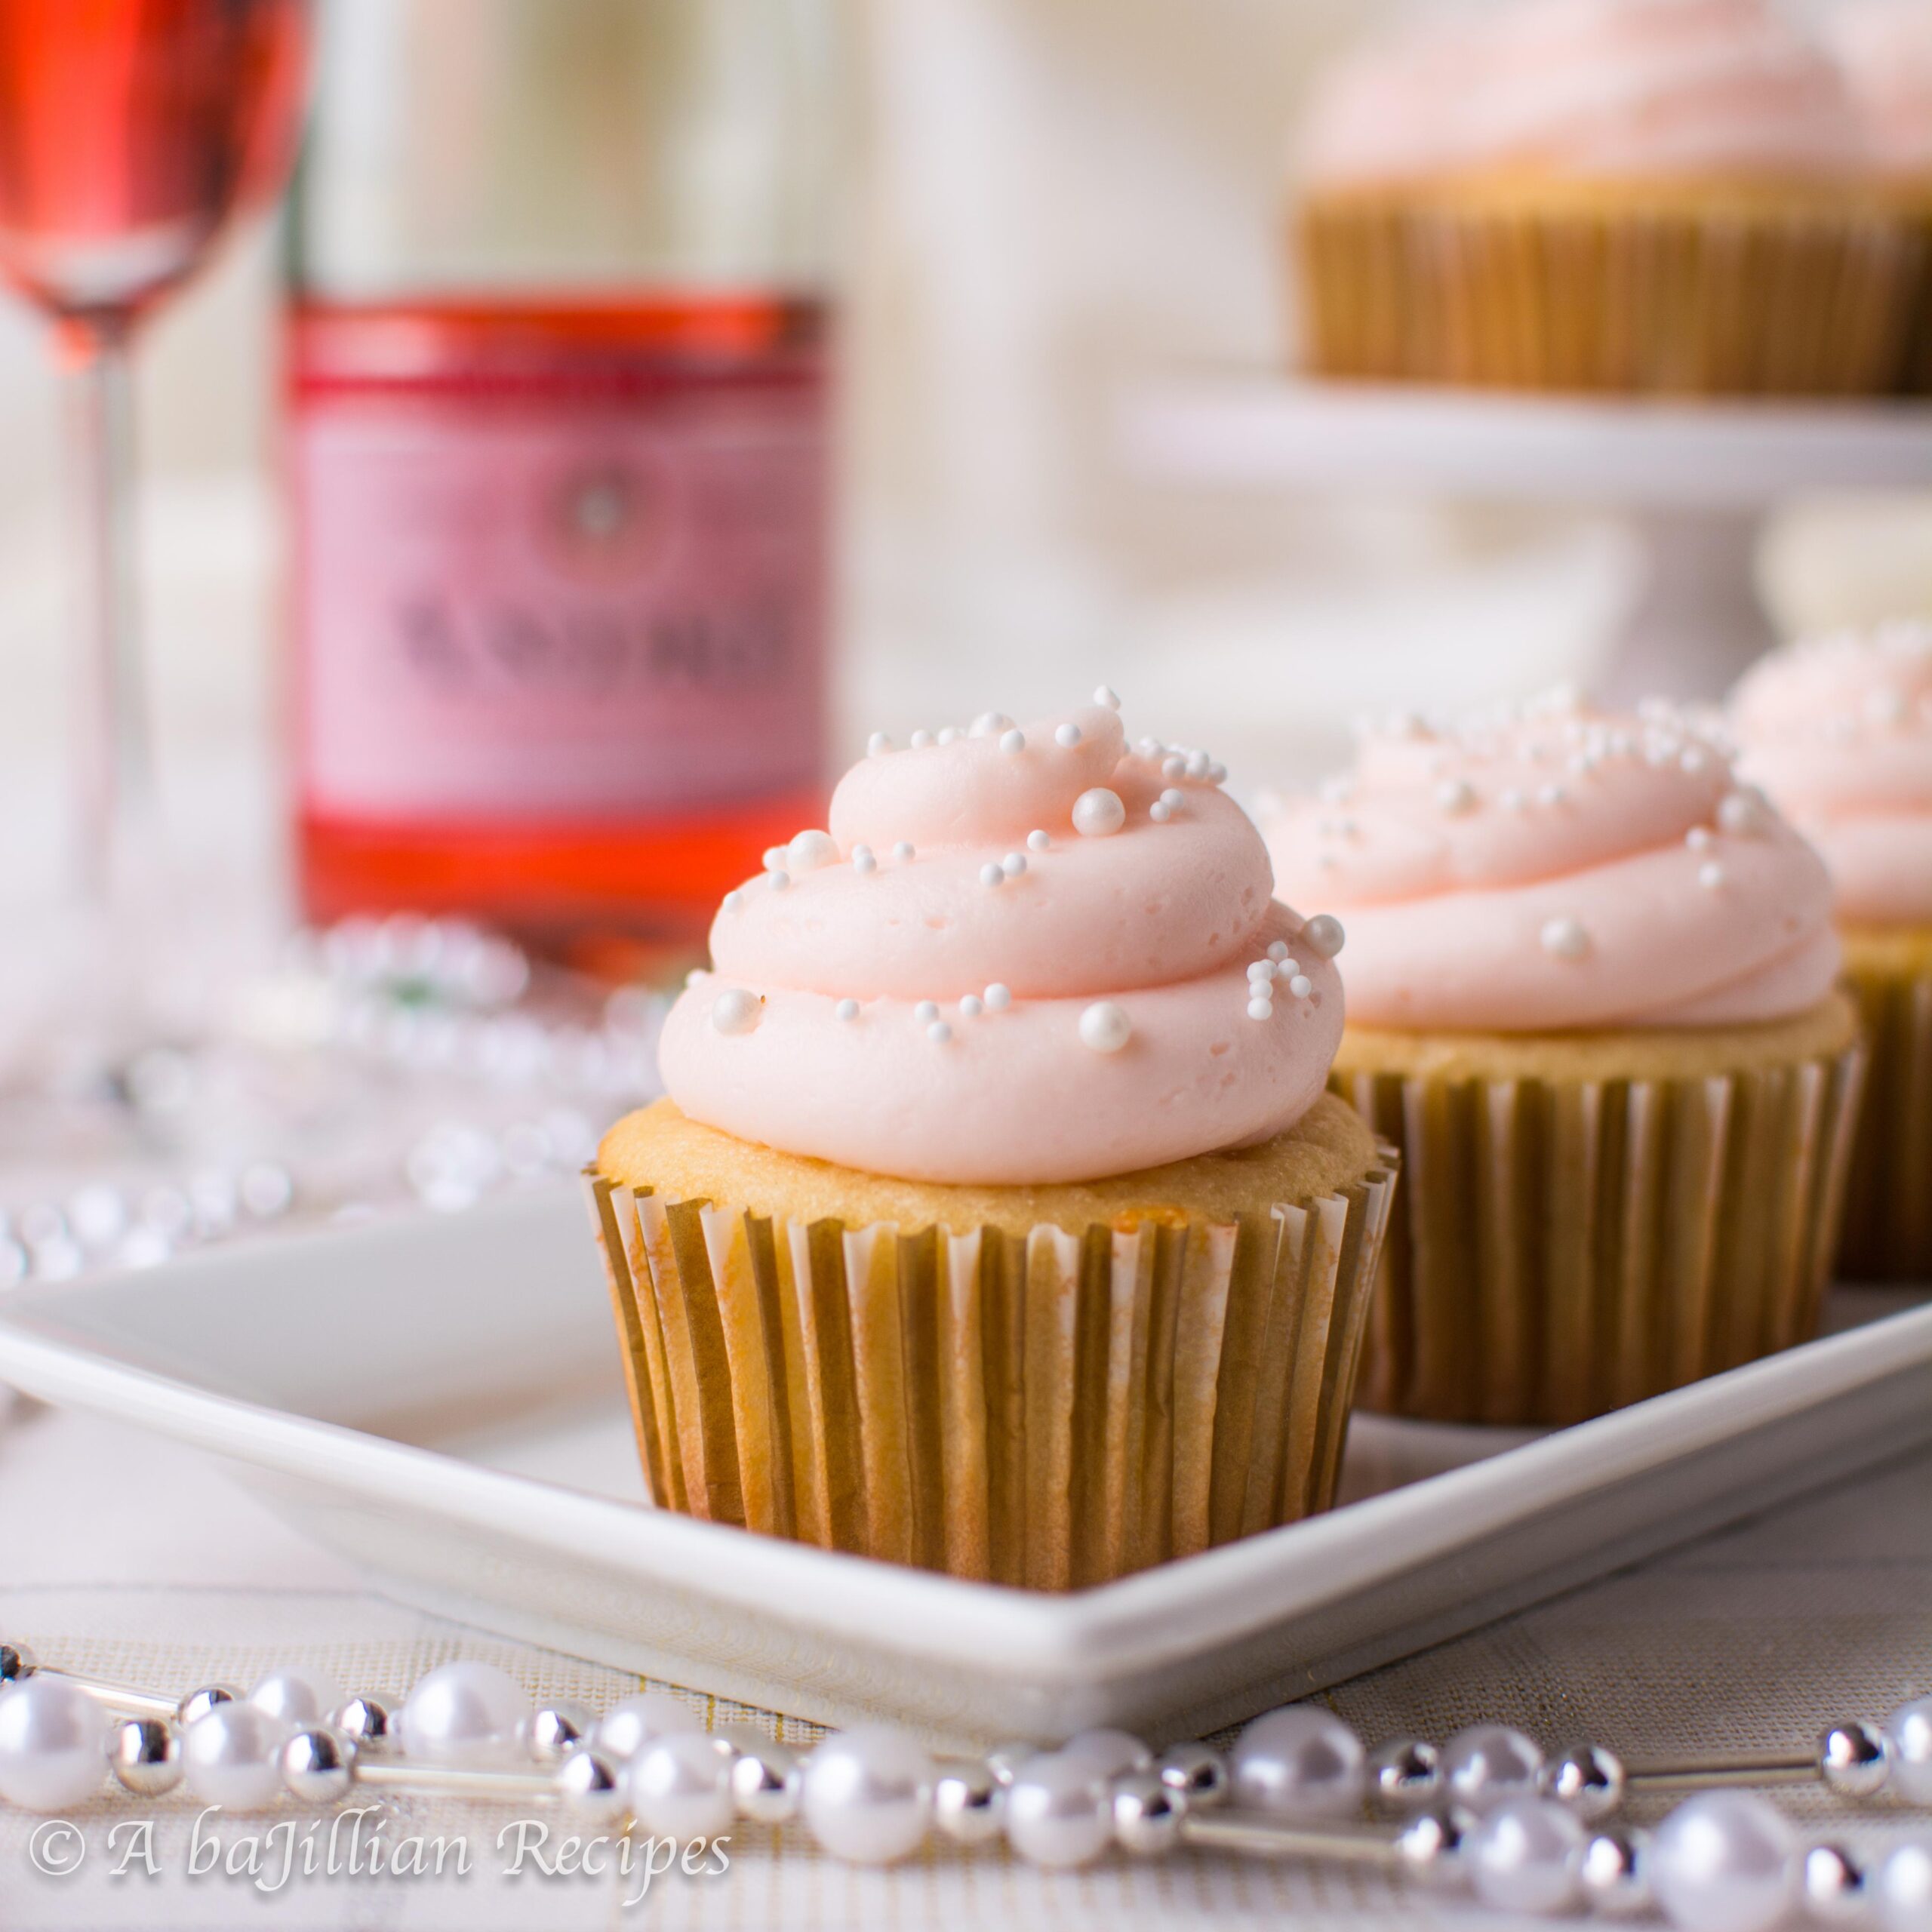  Don't forget to finish your cupcakes with a frosty swirl of champagne buttercream!